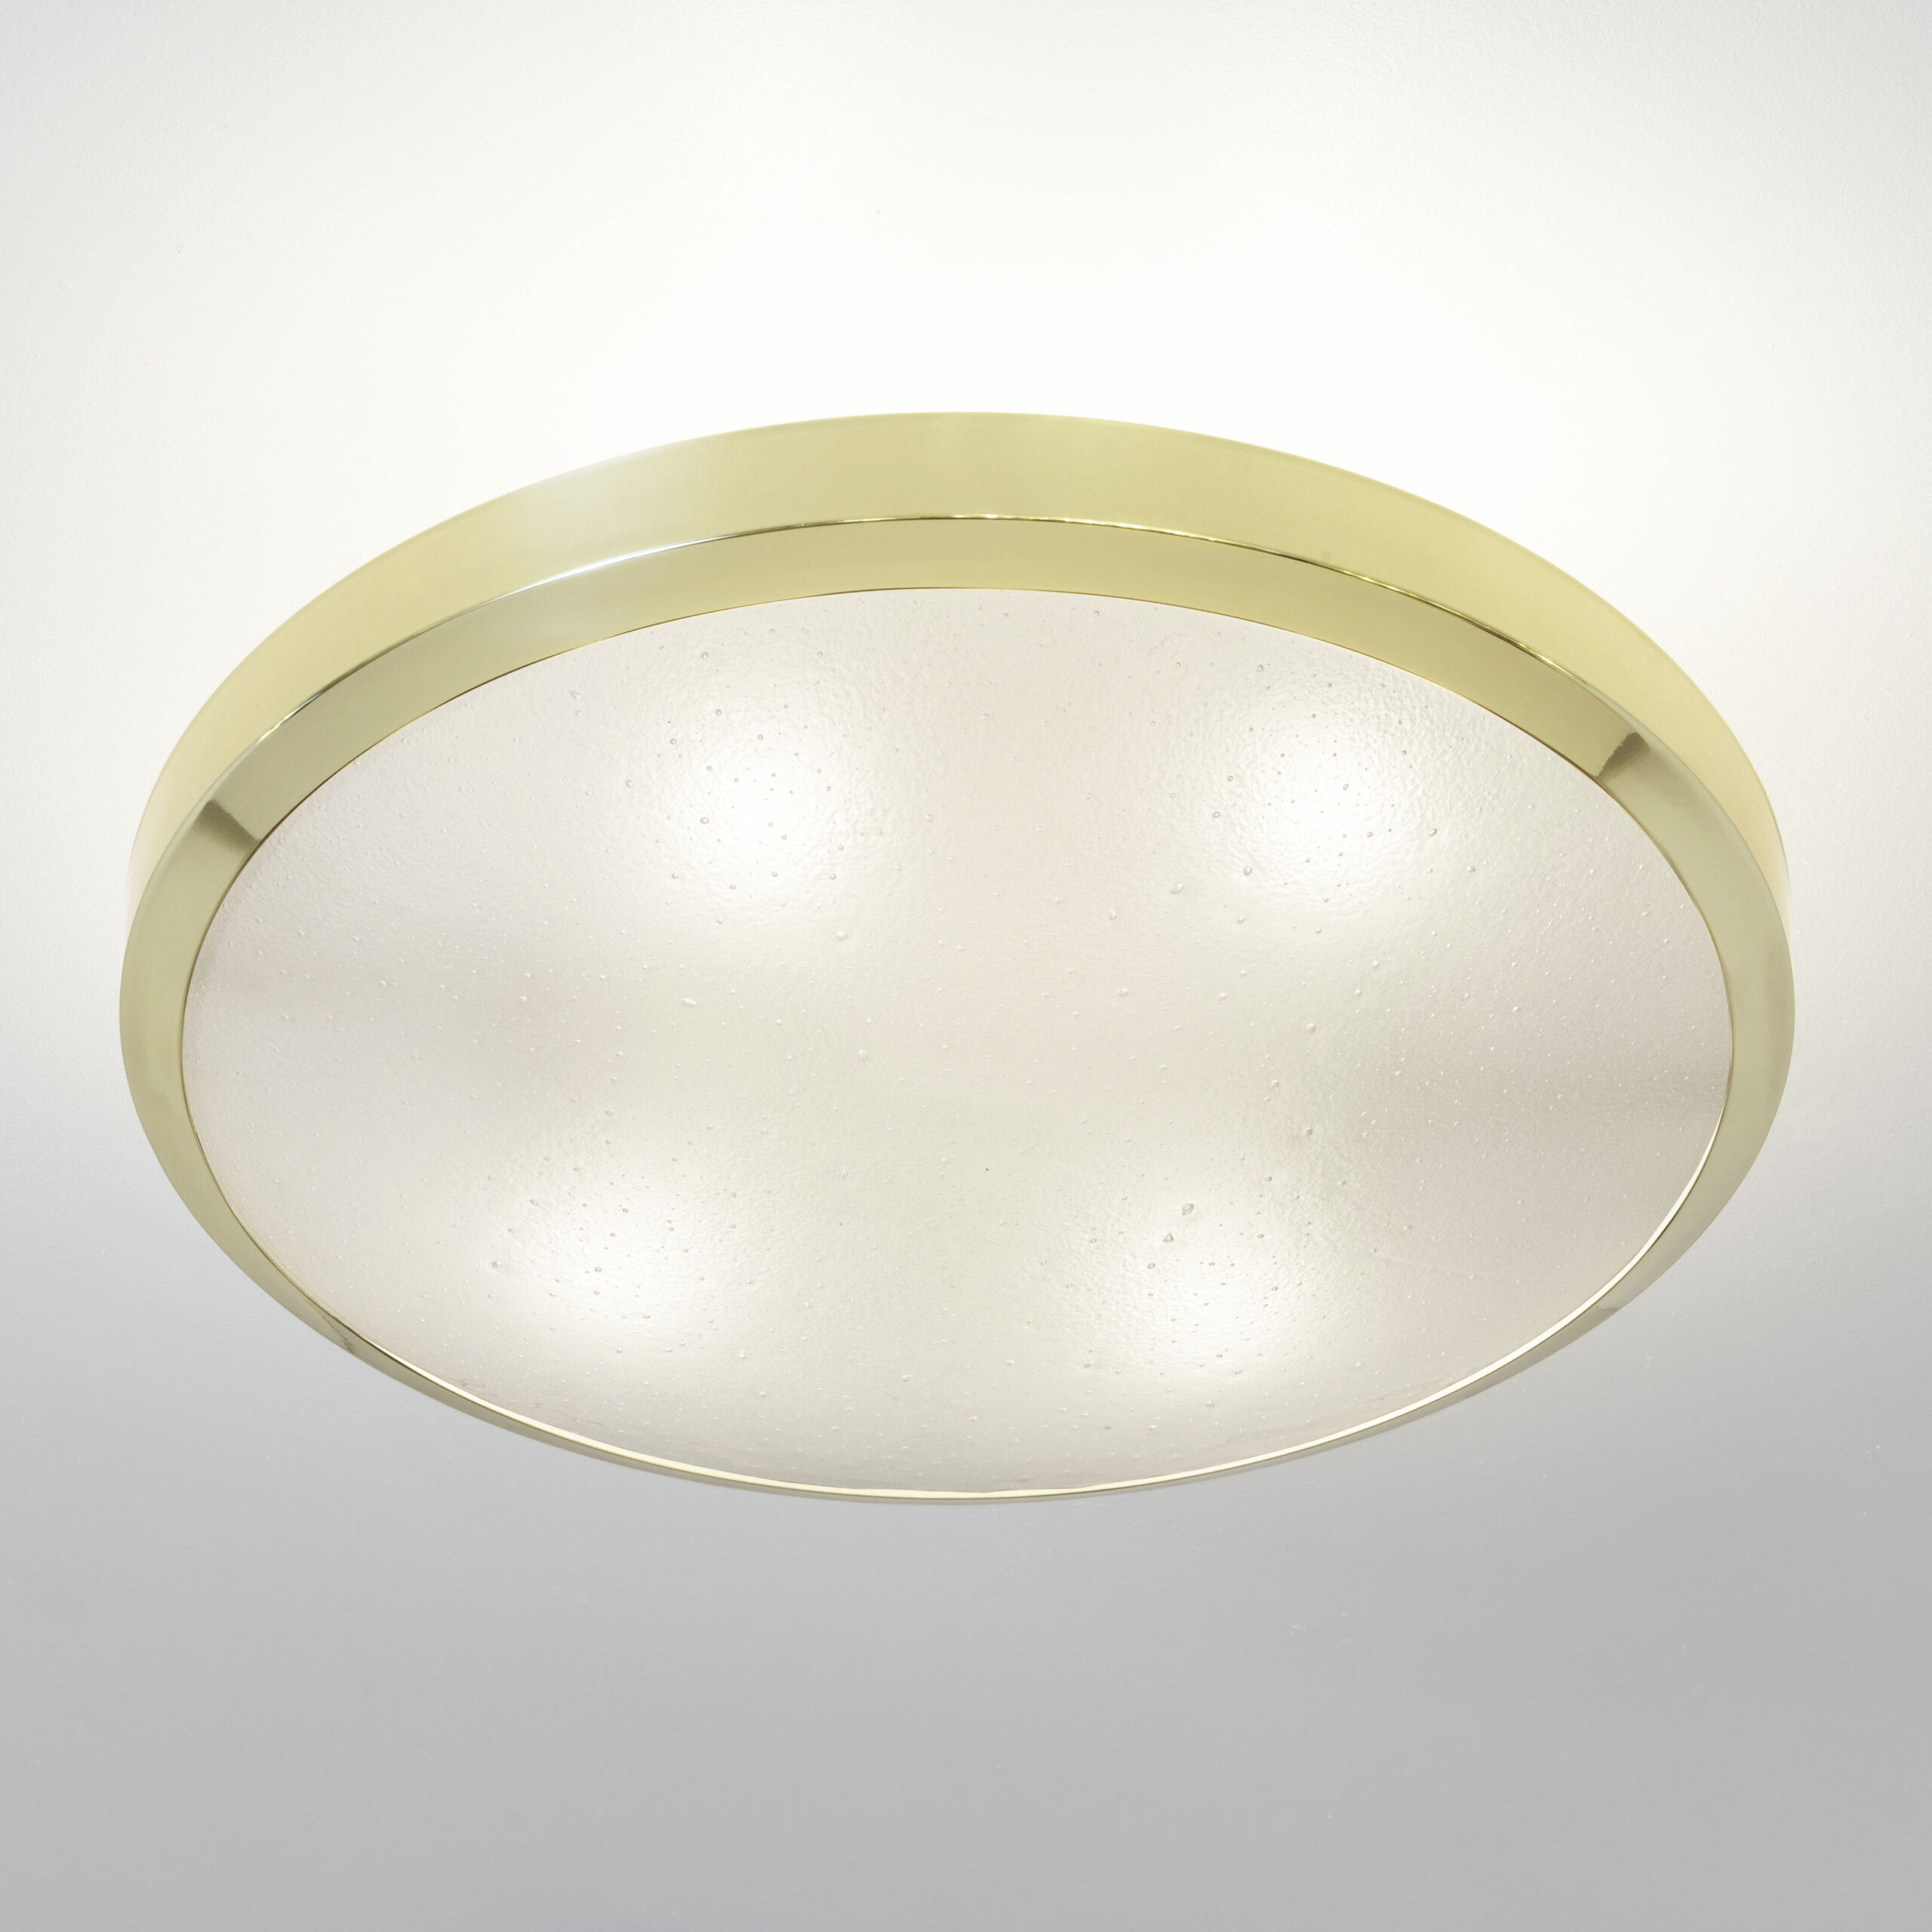 uno ceiling light by gaspare asaro